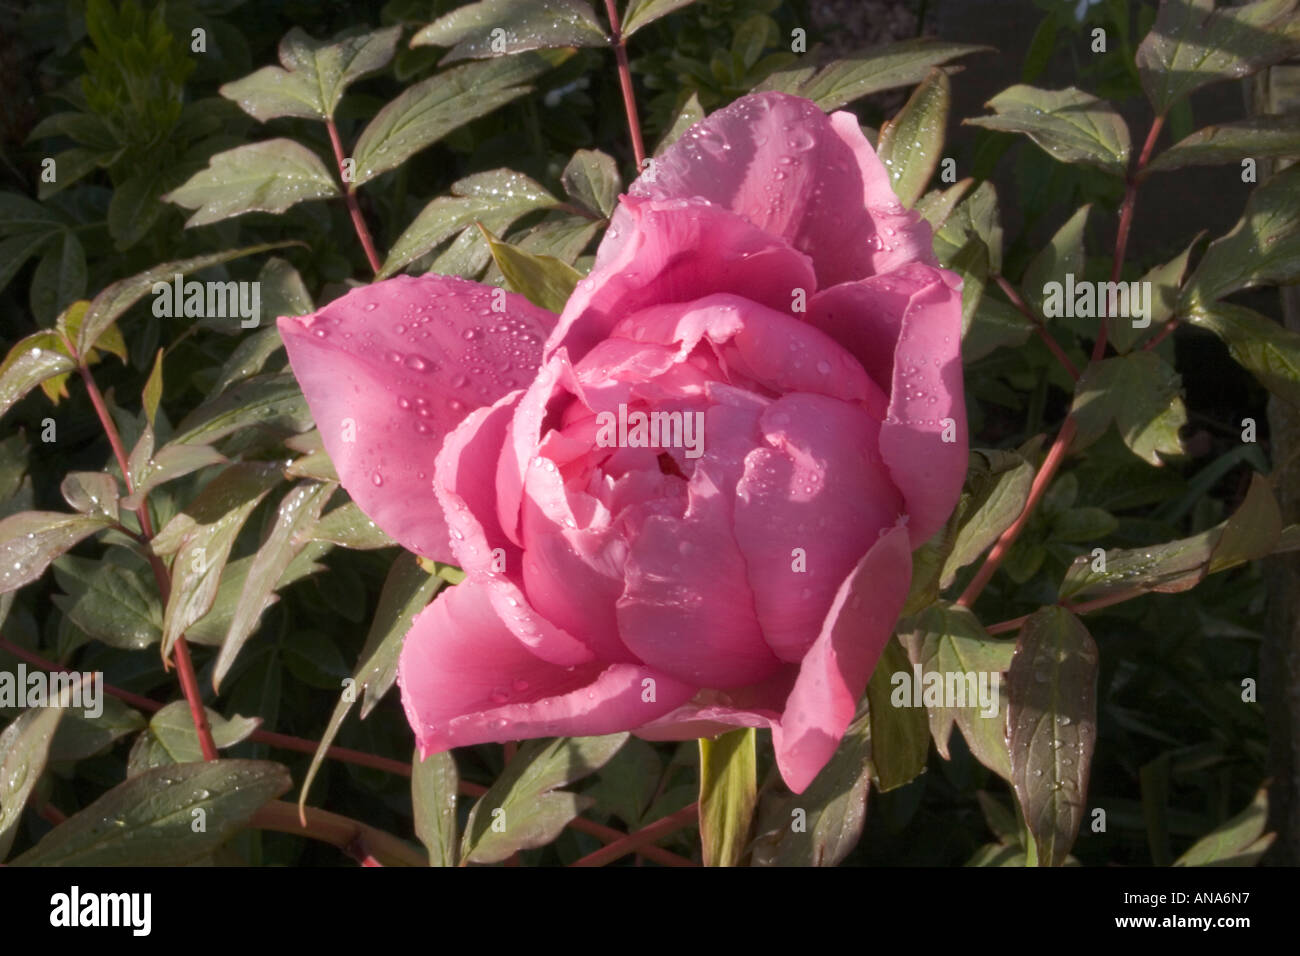 EARLY BLOOM OF RED TREE PEONY FLOWER WITH EARLY MORNING DEW ON PETALS Stock Photo